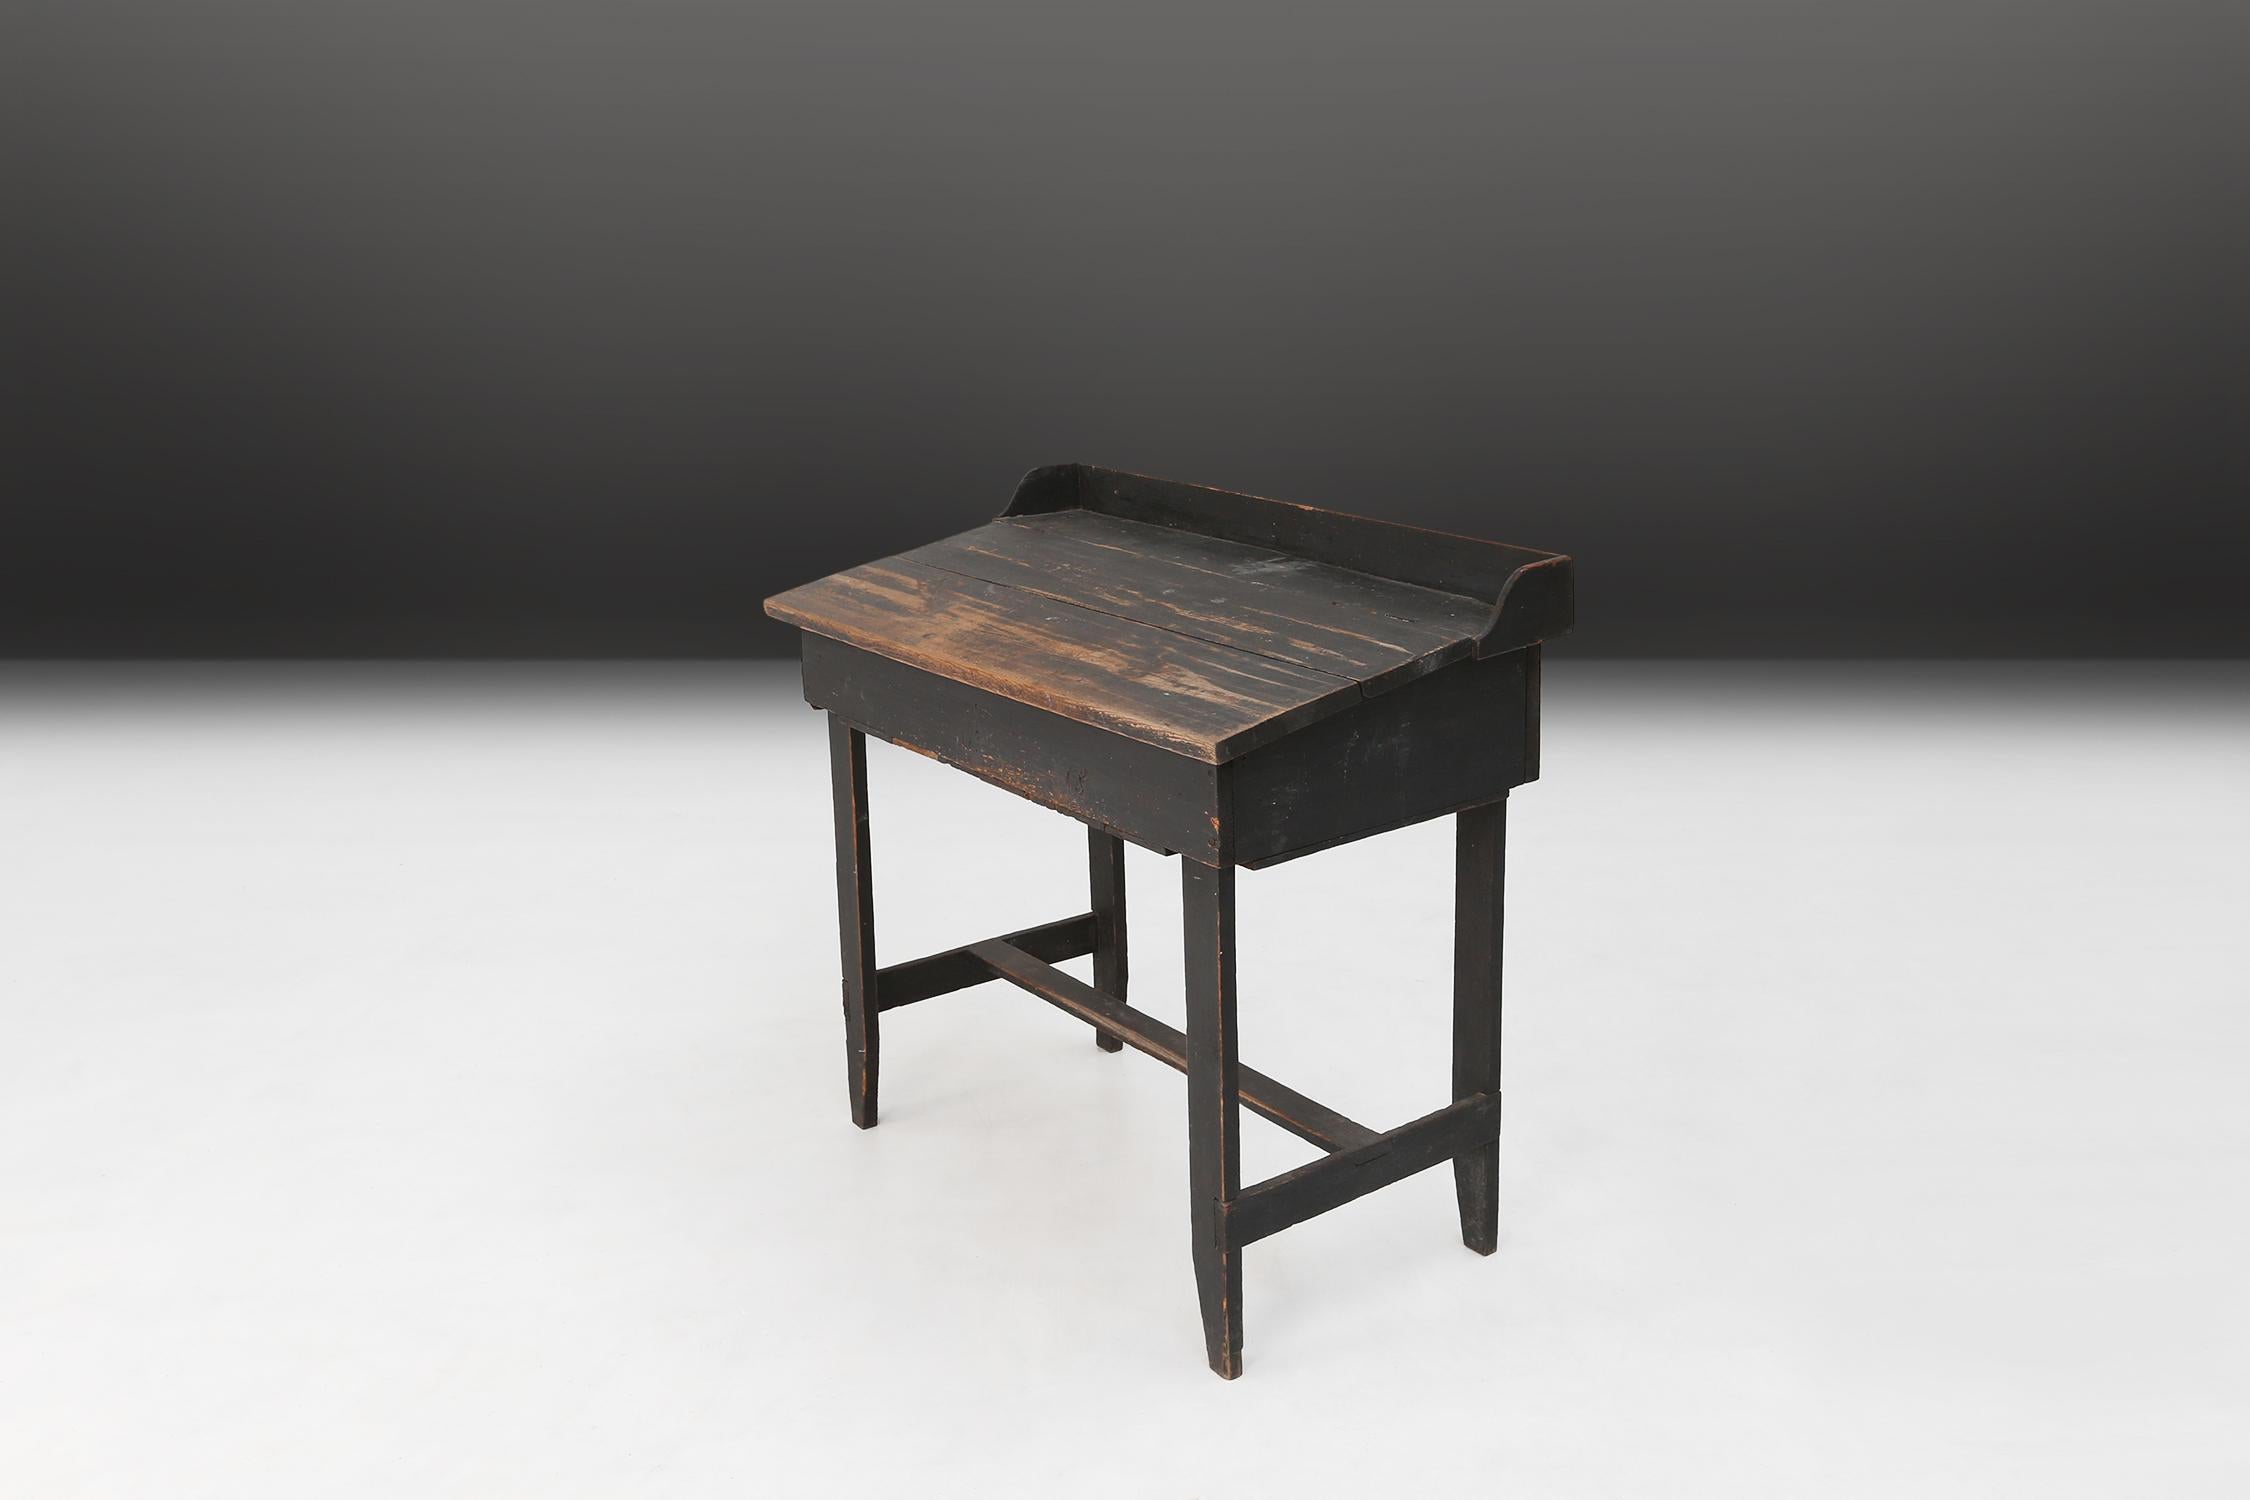 A rustic writing desk made during the 19th century in Sweden. Made of pine wood and original black paint. With great patina on the wood.